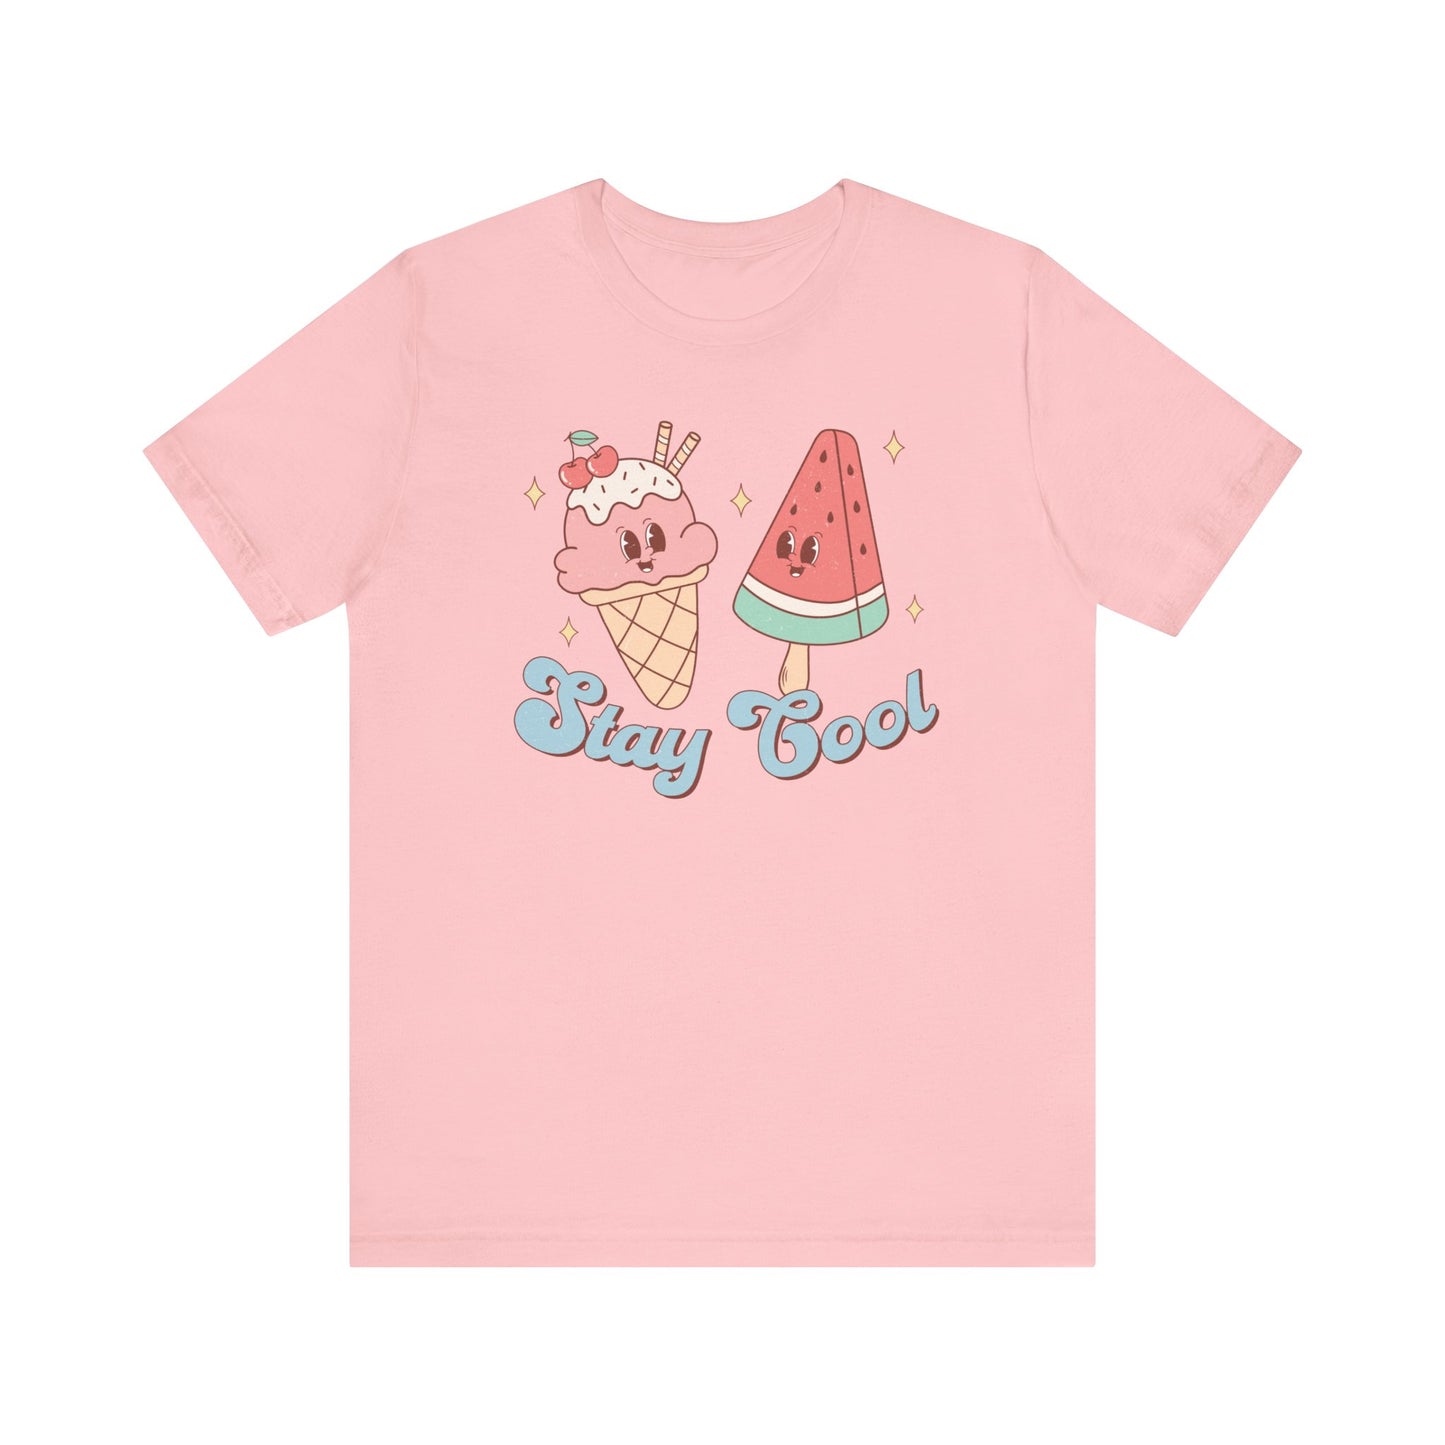 Kawaii Ice Cream and Watermelon T-Shirt, Cute 'Stay Cool' Graphic Tee, Summer Casual Top, Fun Foodie Shirt for All Ages